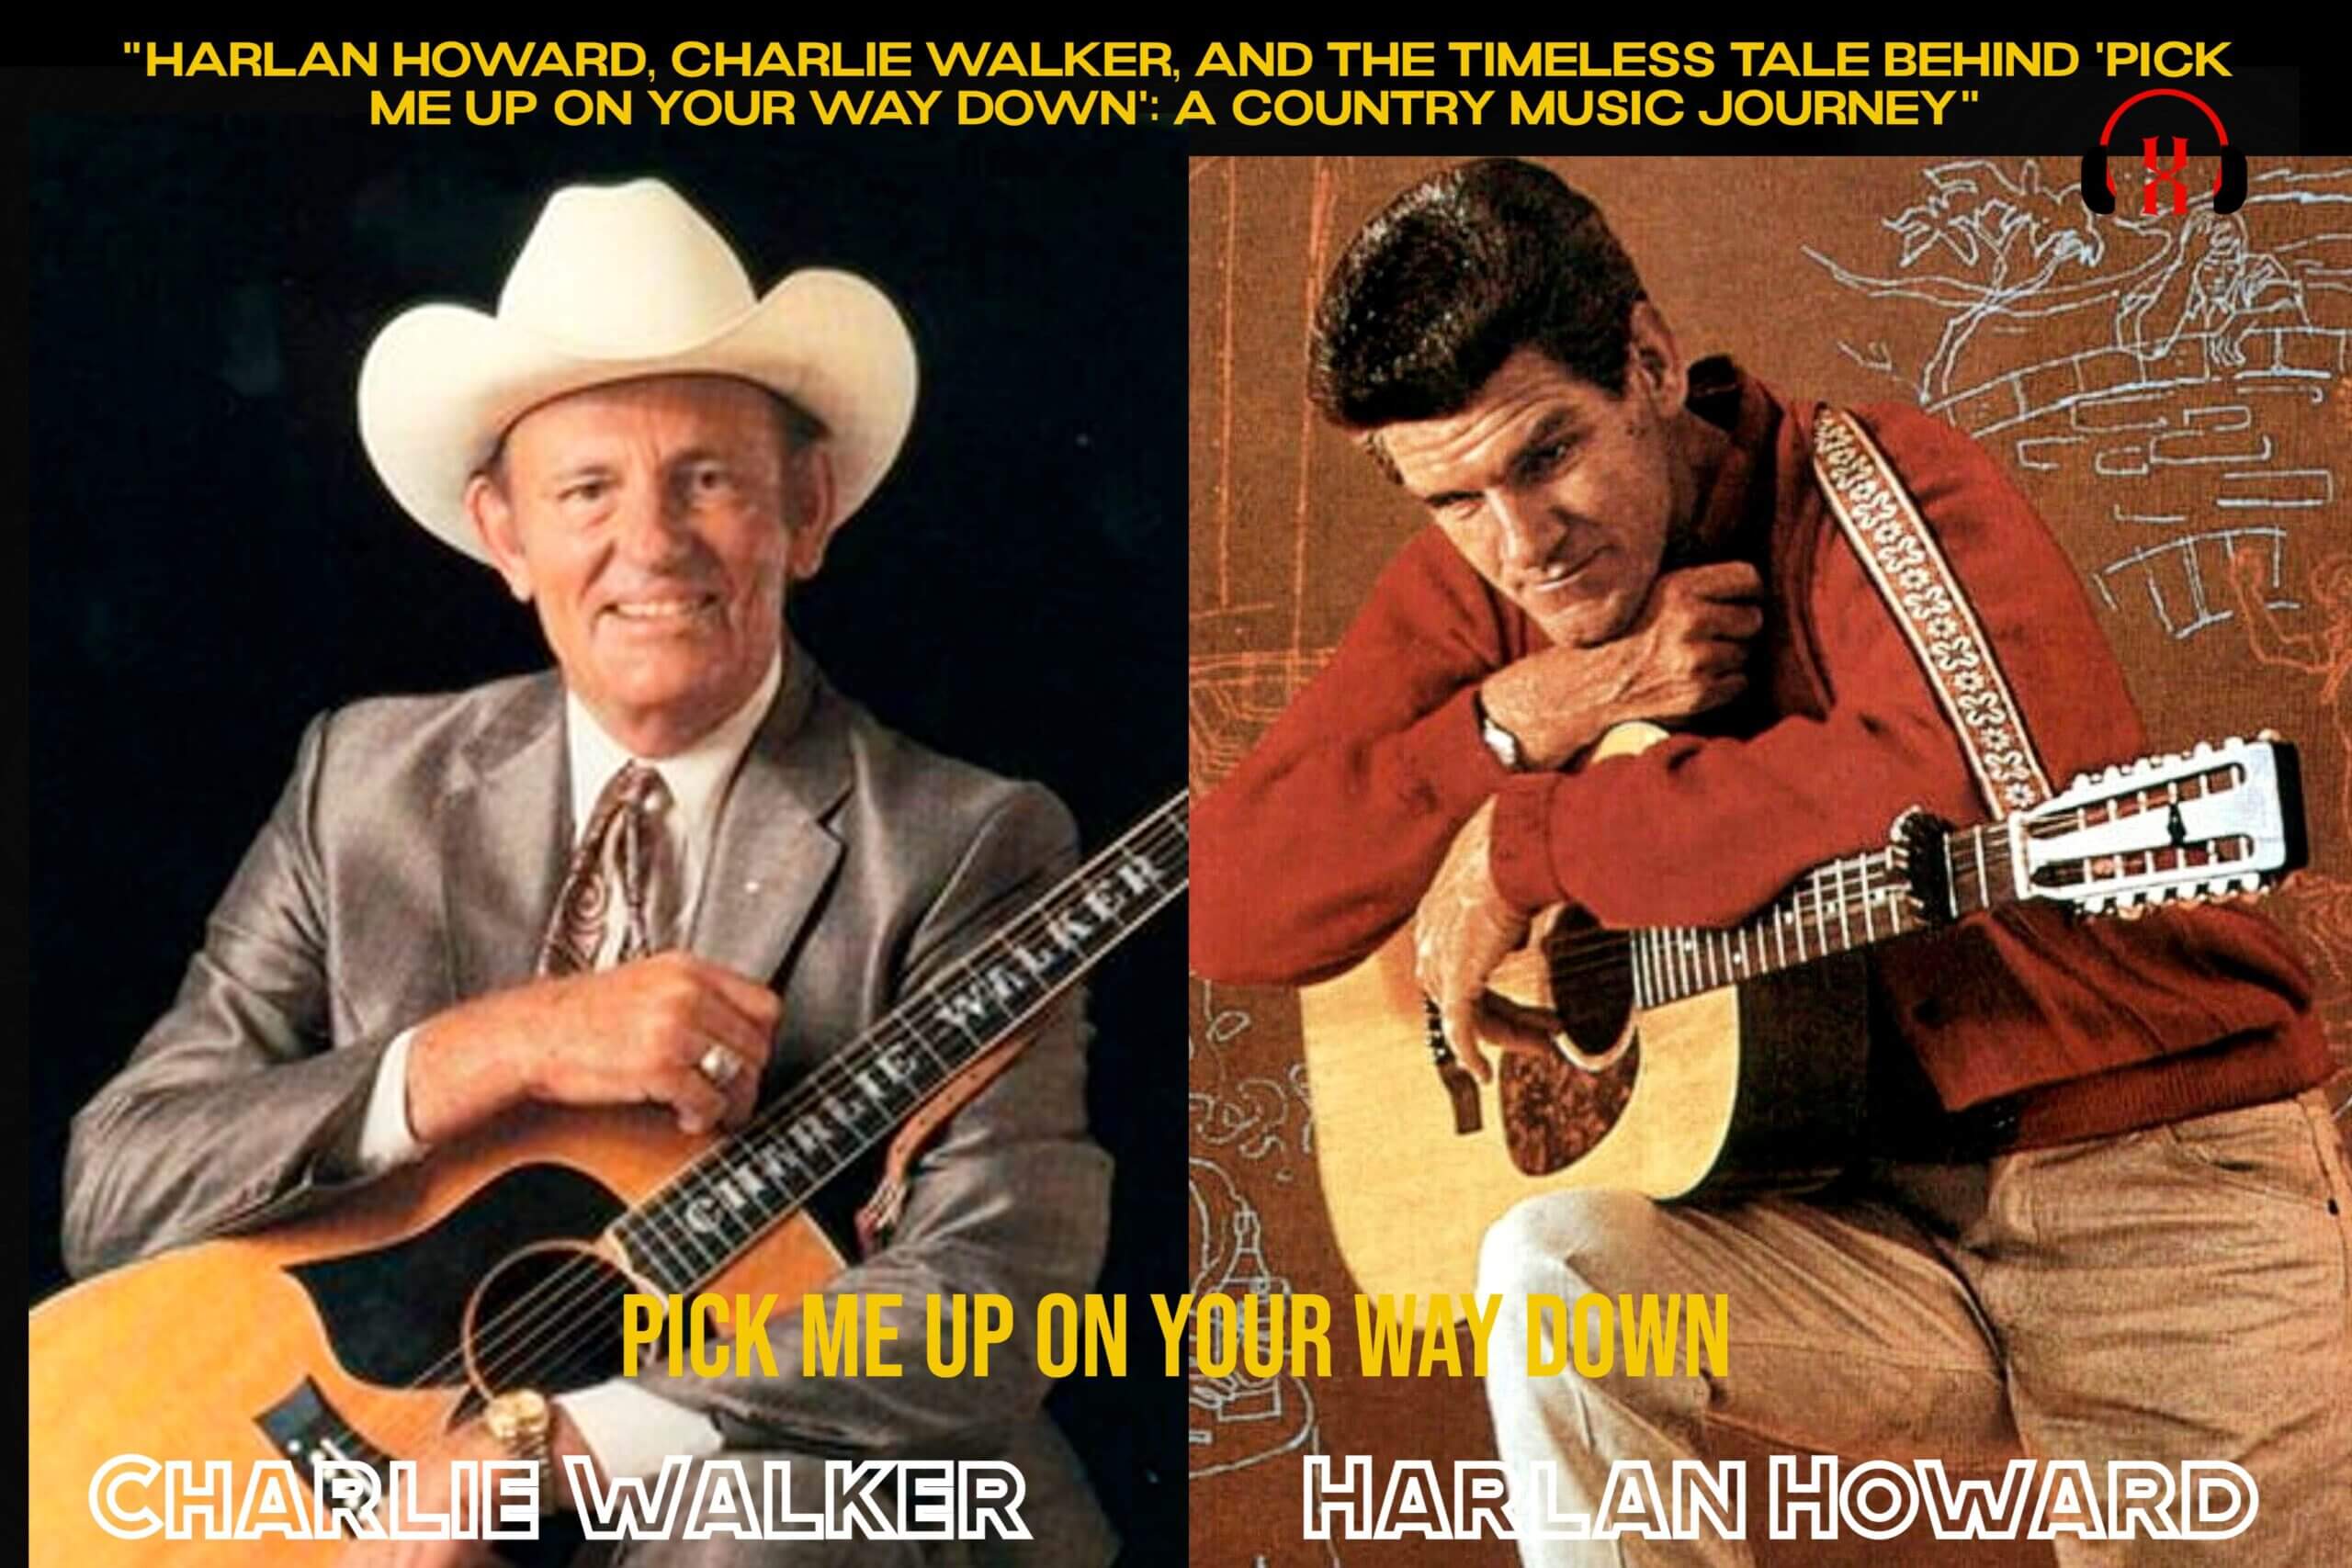 Harlan Howard, Charlie Walker, and the Timeless Tale Behind 'Pick Me Up On Your Way Down': A Country Music Journey"